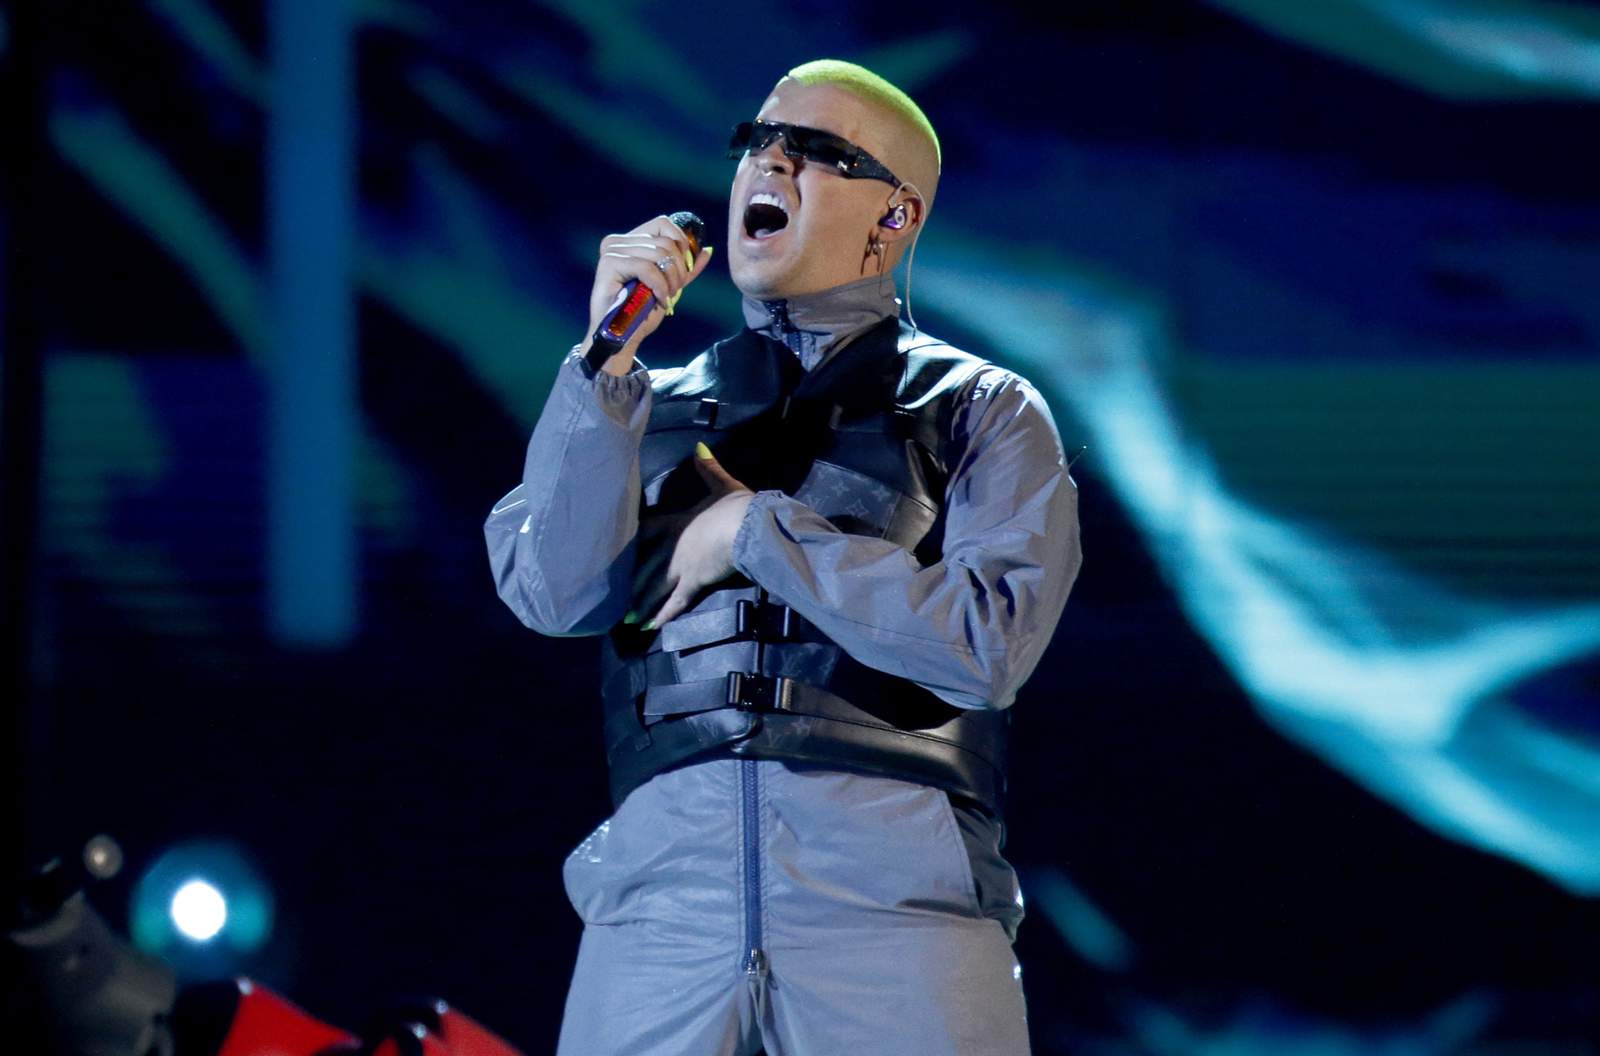 Bad Bunny is Spotify's most-streamed artist of 2020